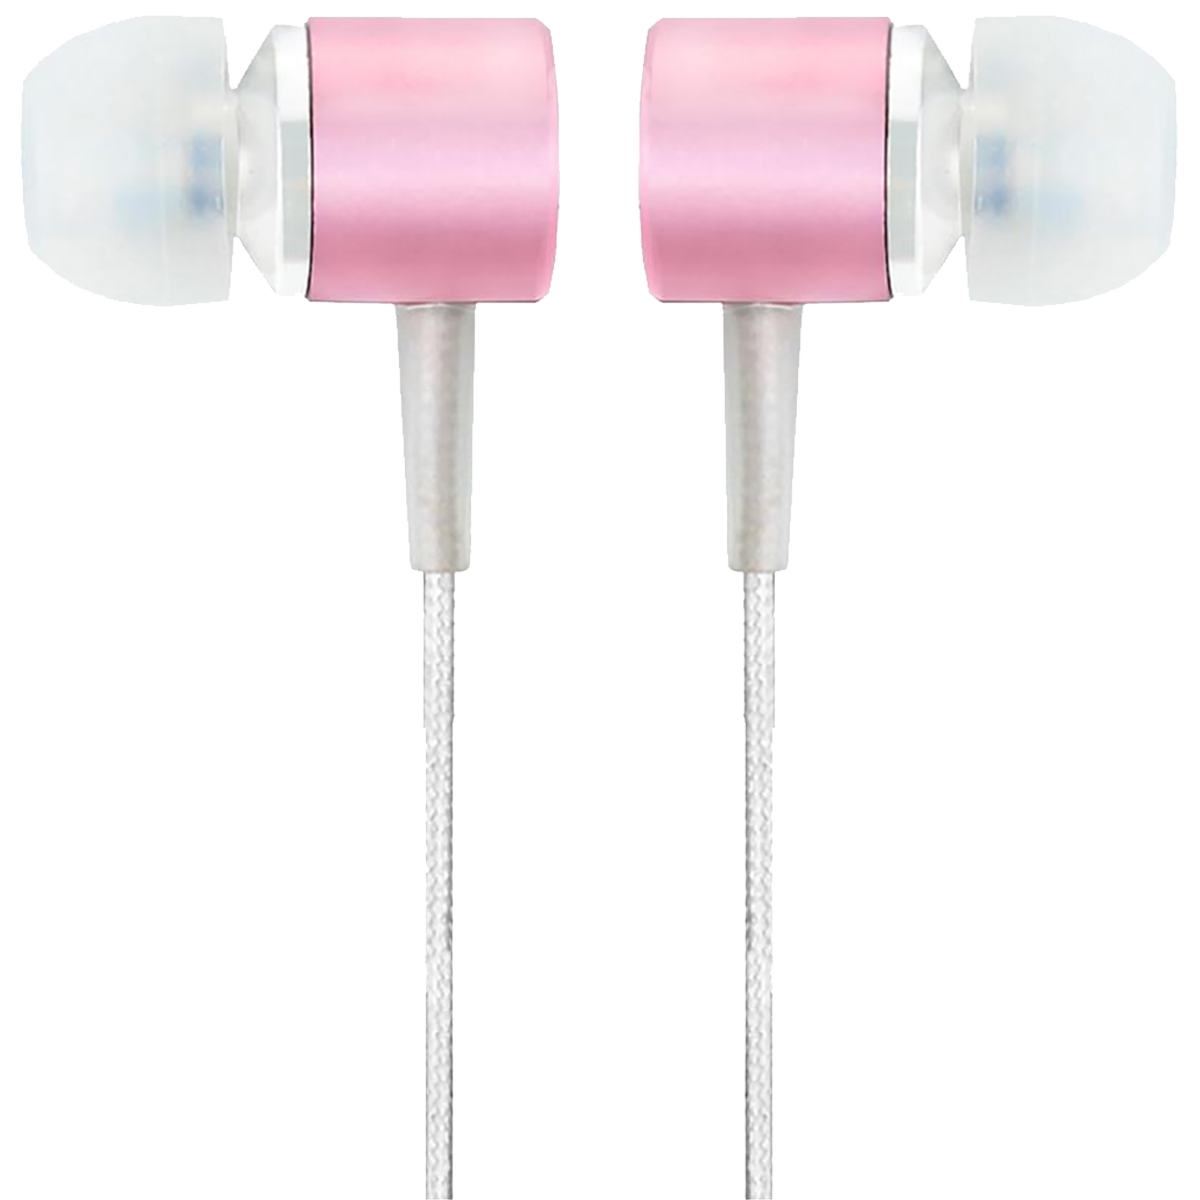 Crossloop Daily Fashion Series CSLE103 In-Ear Wired Earphone with Mic (Blocks Ambient Noise, White/Pink)_1